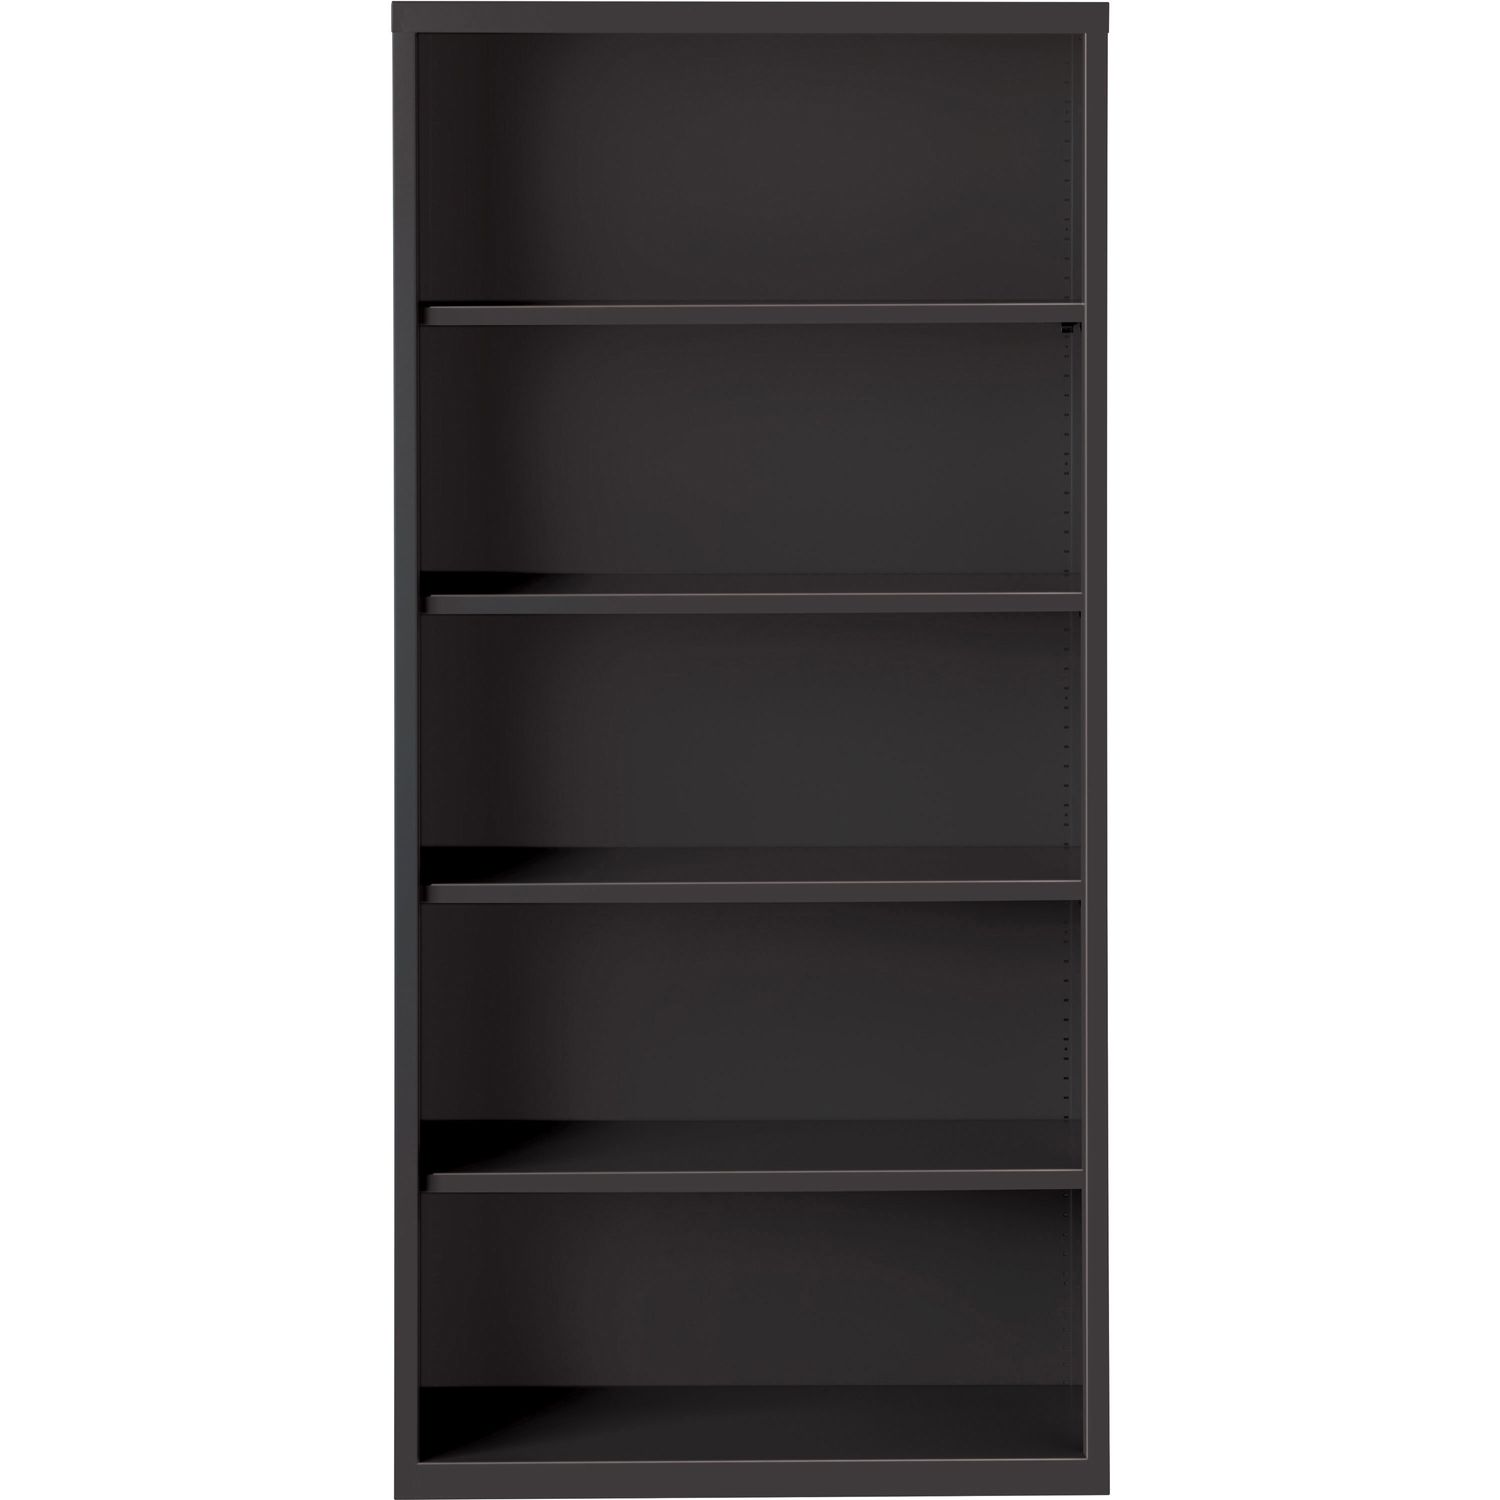 Fortress Series Bookcases 34.5" x 13" x 72", 5 x Shelf(ves), Black, Powder Coated, Steel, Recycled